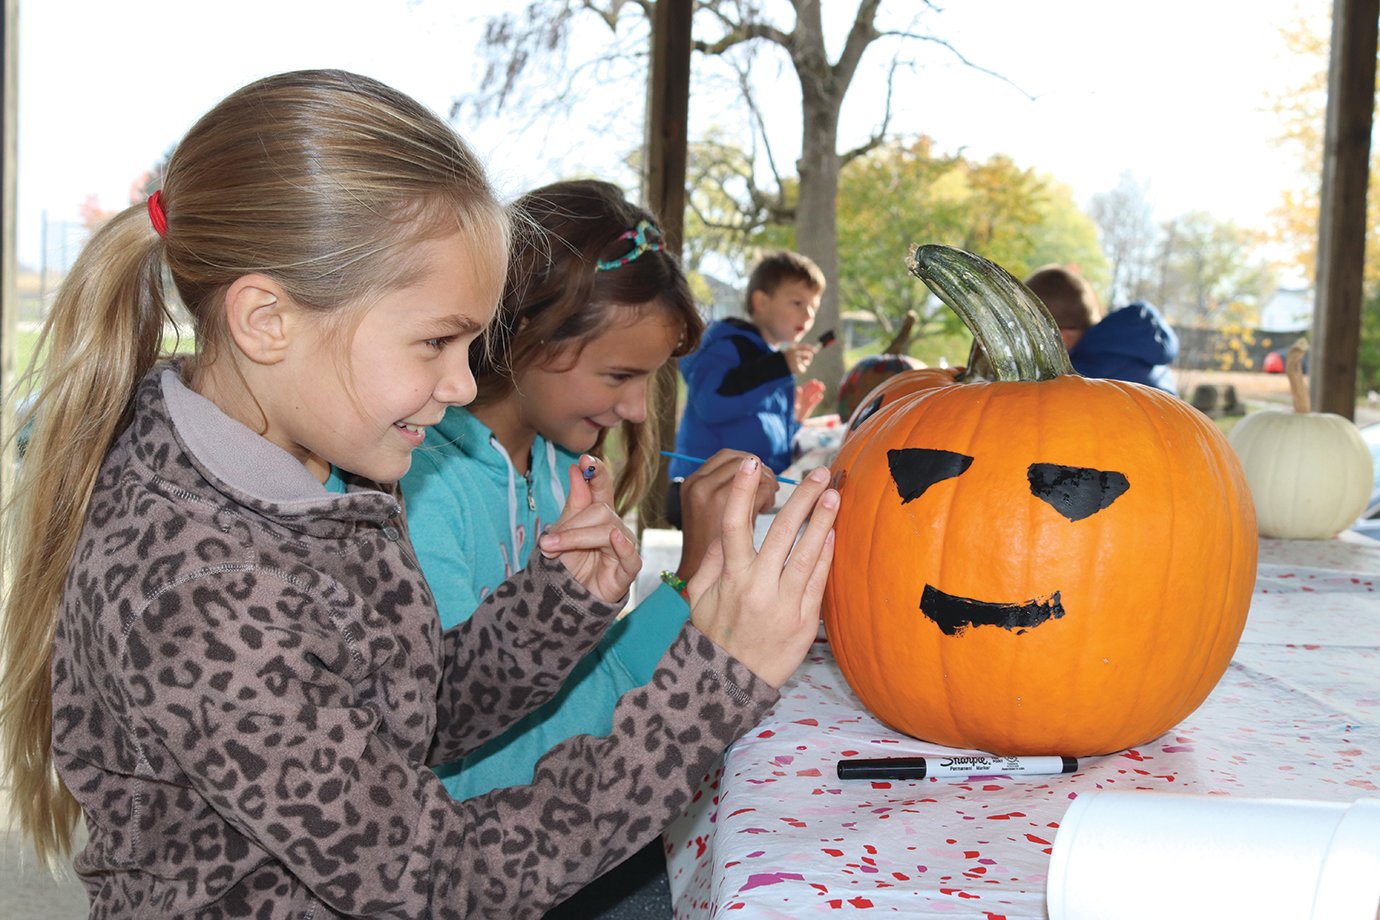 Sophia Johnson, 11, and sister Ella Johnson, 12, paint some Halloween pumpkins Thursday at Bulldog Park in Linden as part of the Linden Library's efforts to provide children with fun activities outdoors during the coronavirus (COVID-19) pandemic.